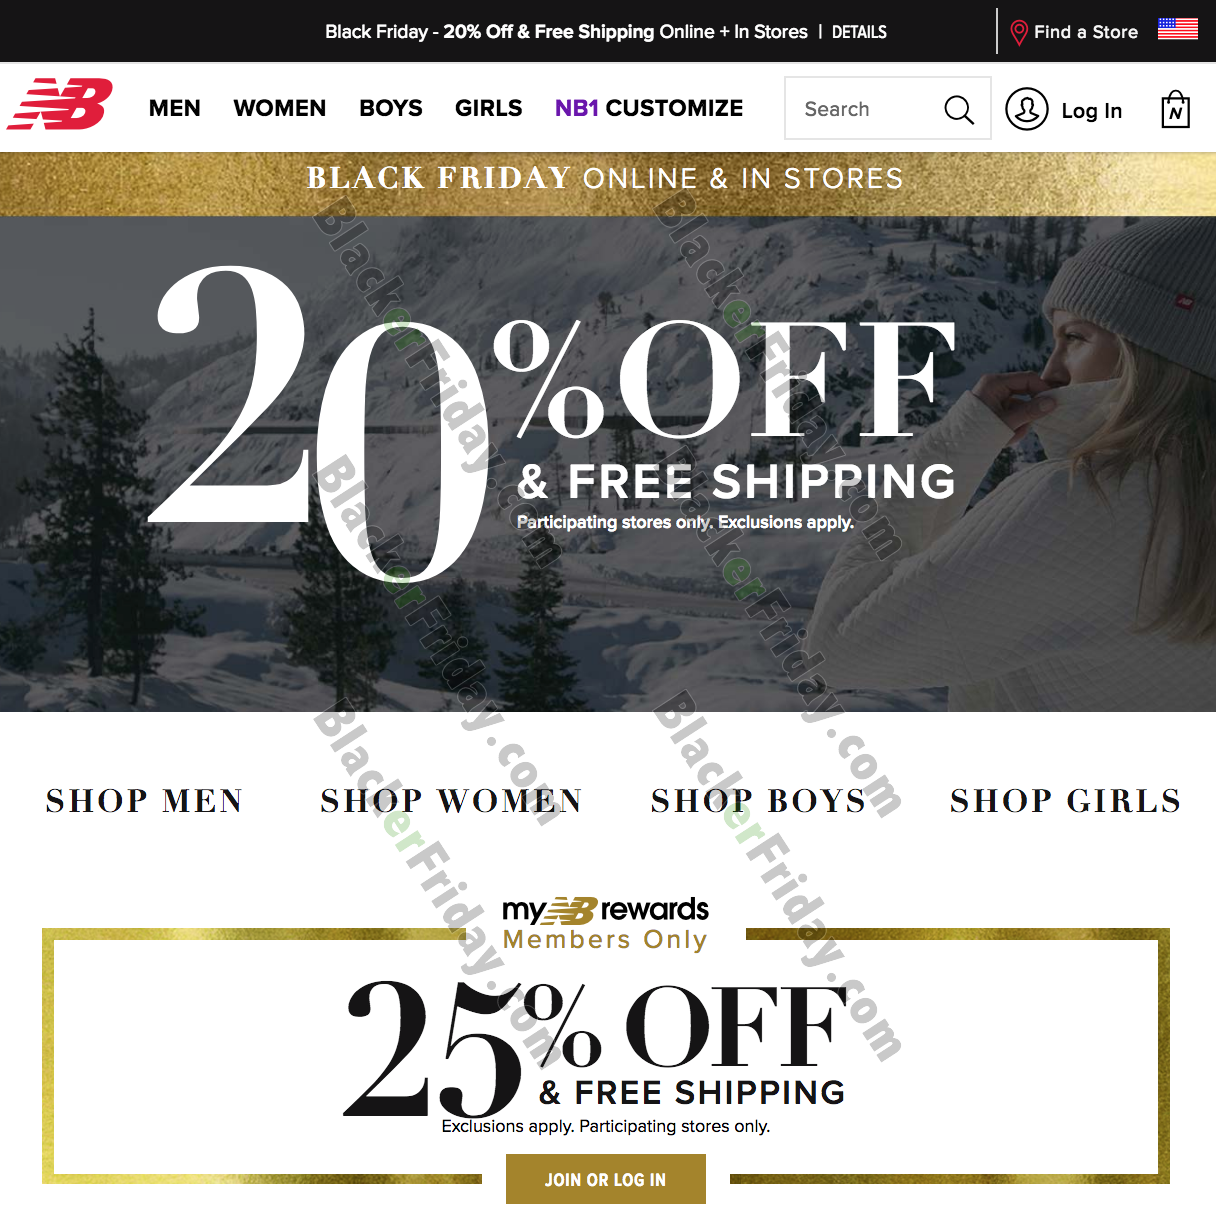 new balance outlet black friday